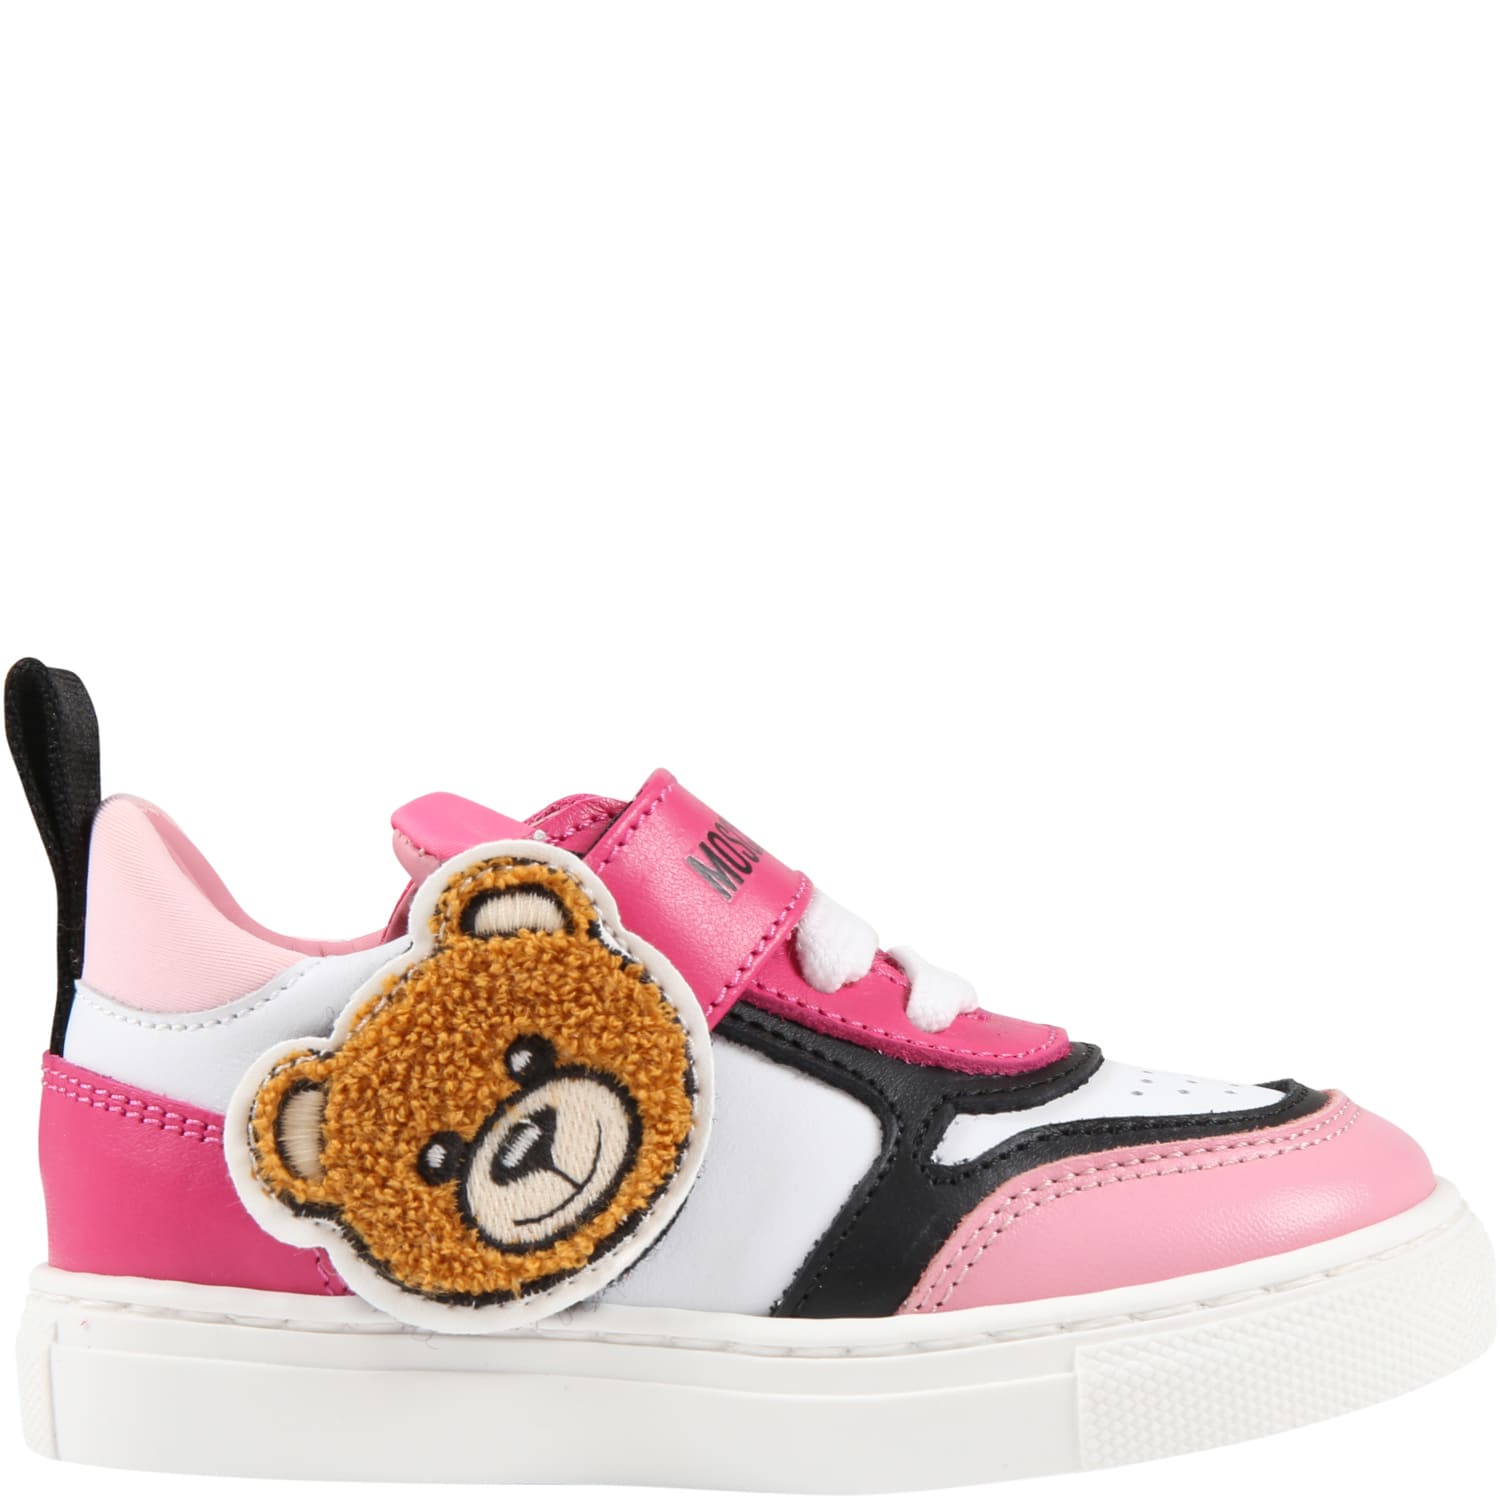 Moschino Multicolor Sneakers For Girl With Teddy Bear